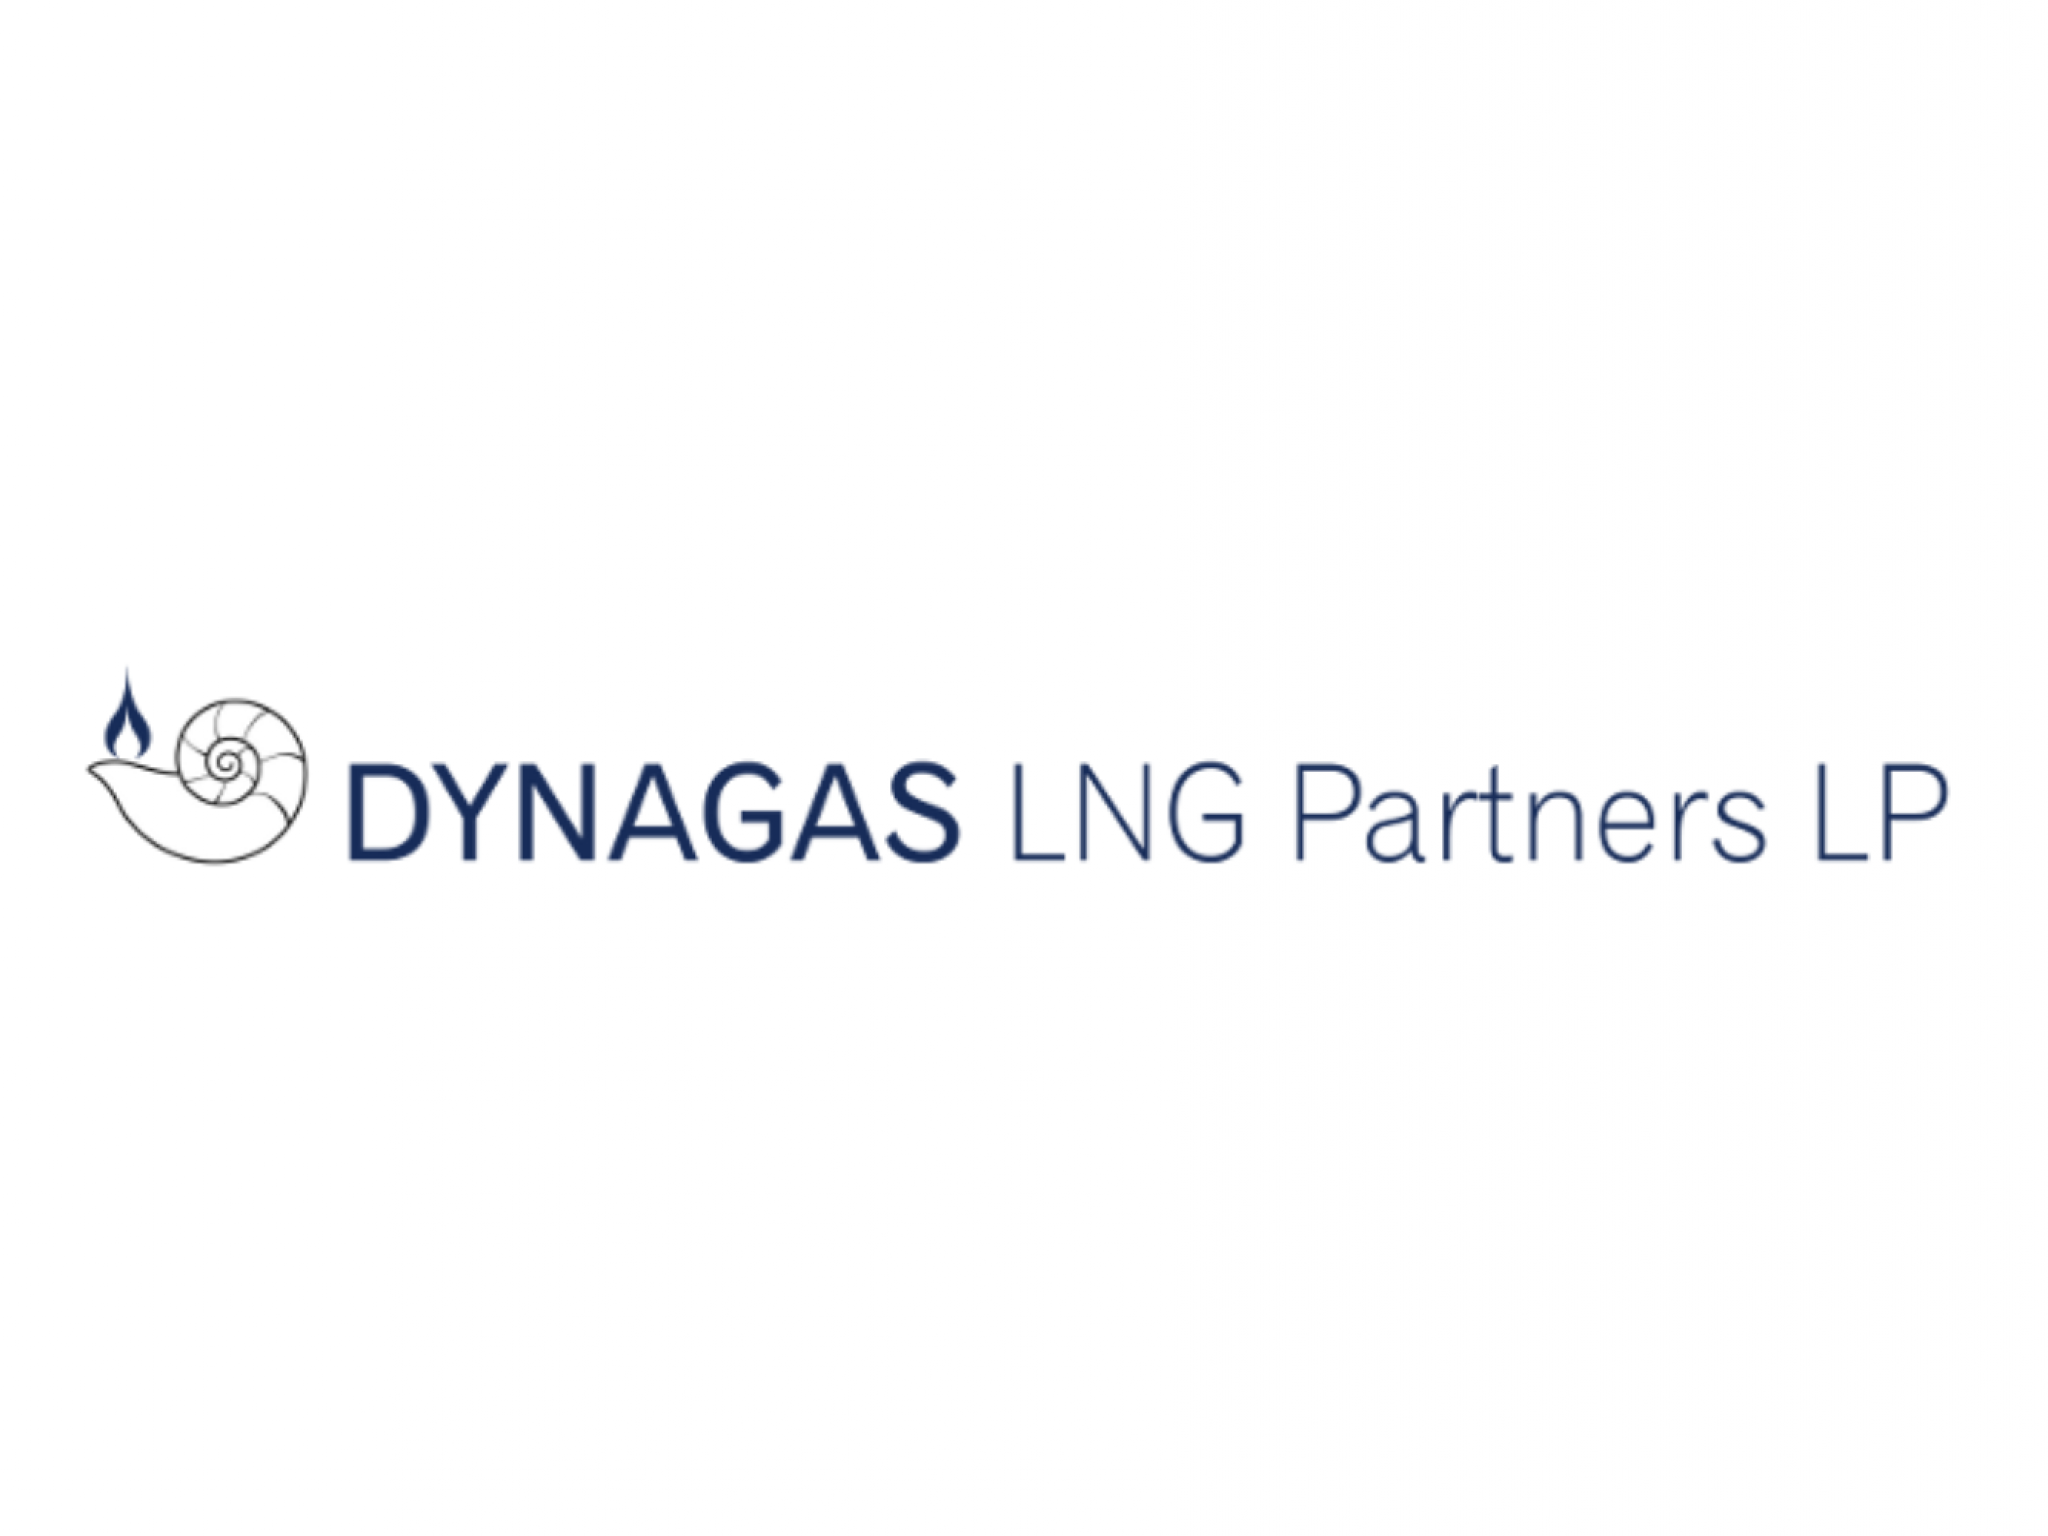  dynagas-lng-partners-shares-dip-after-mixed-q4-results 